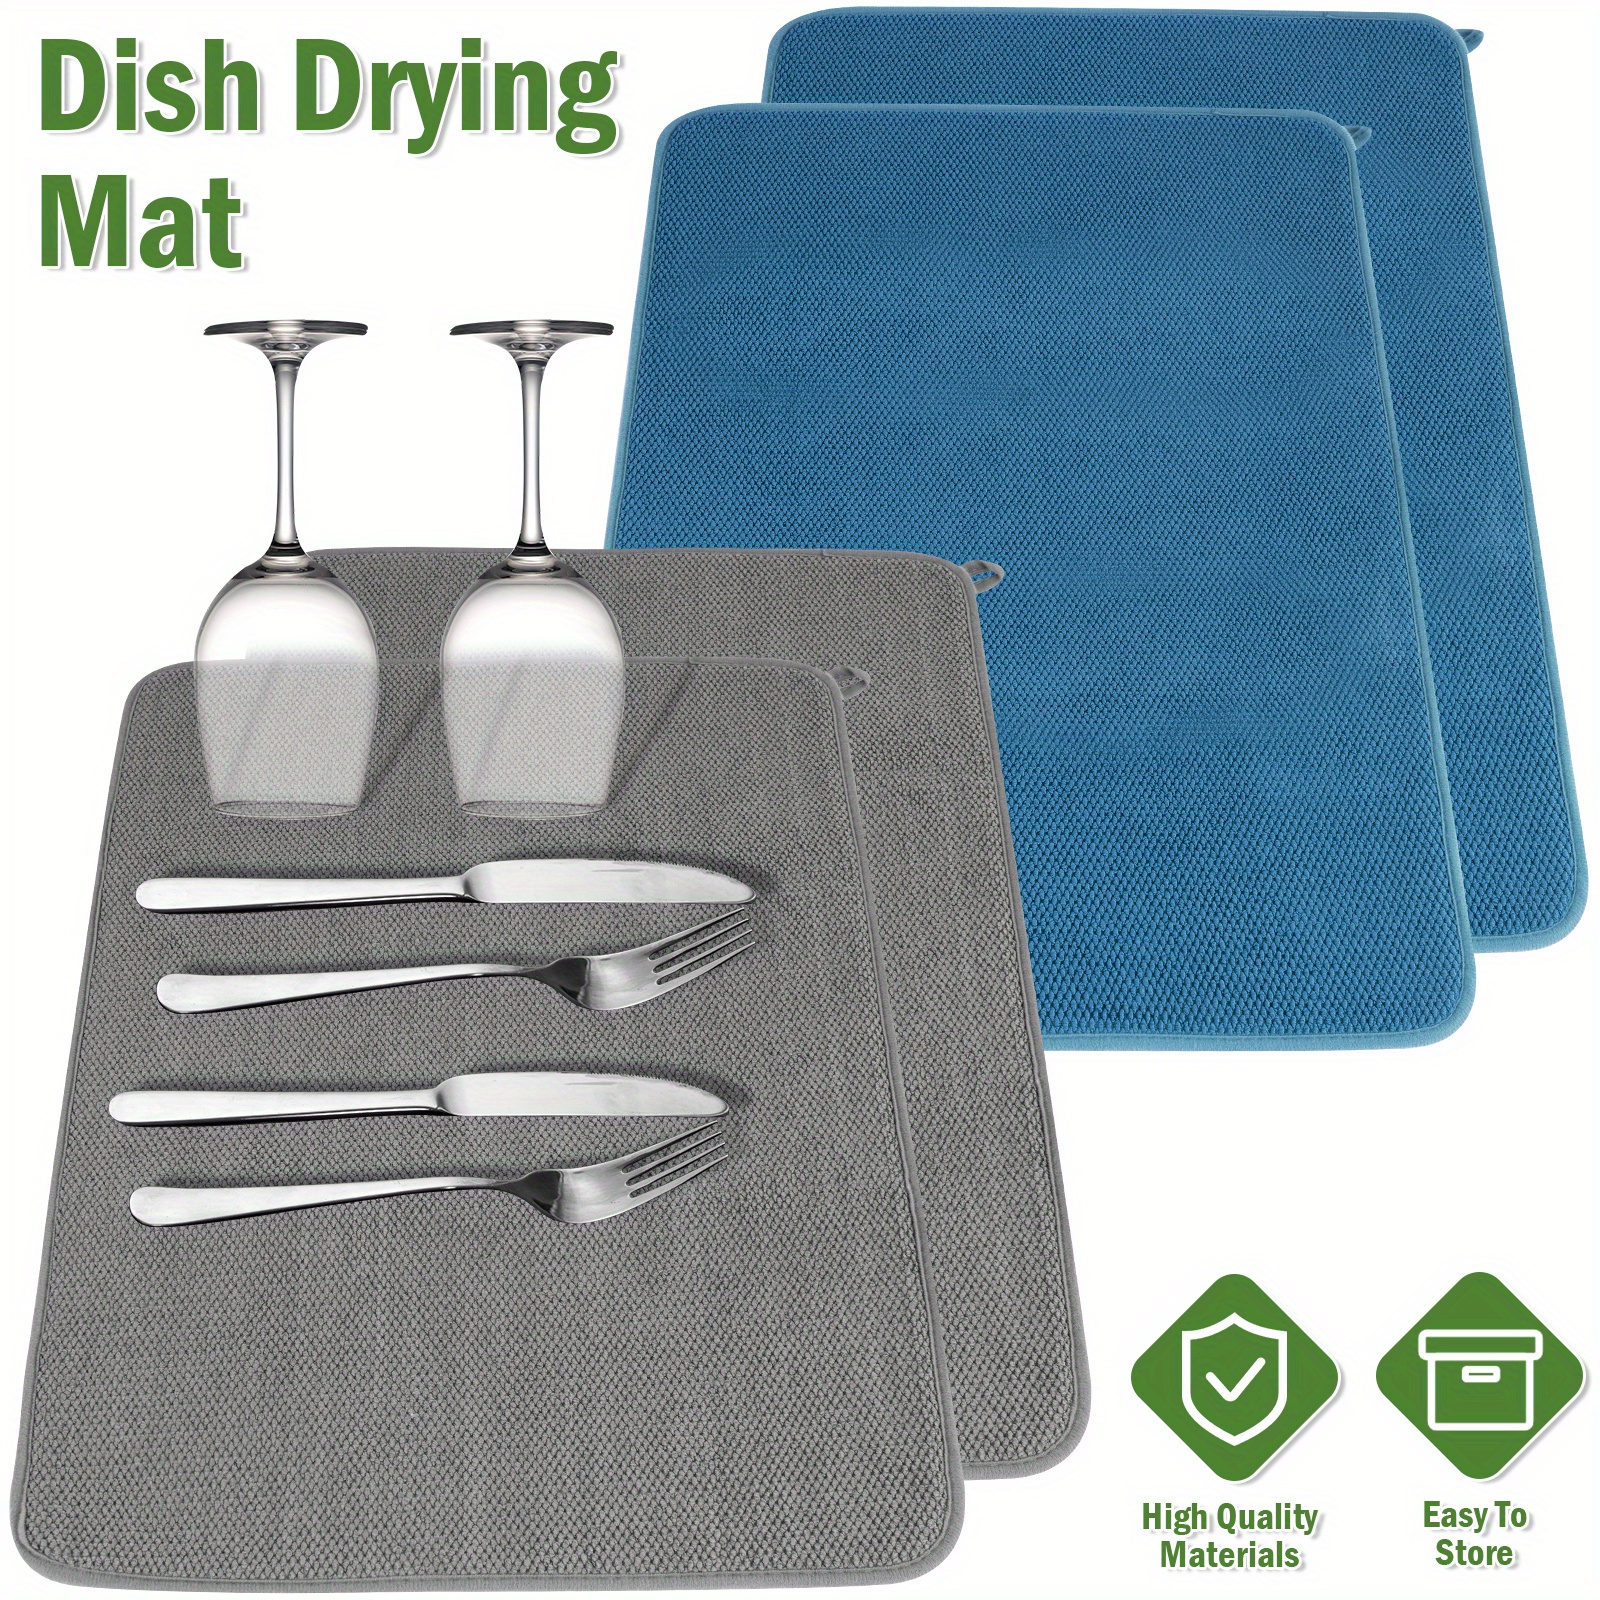 To encounter Silicone Dish Drying Mat -Small 17.5 x 8 - Set of 2